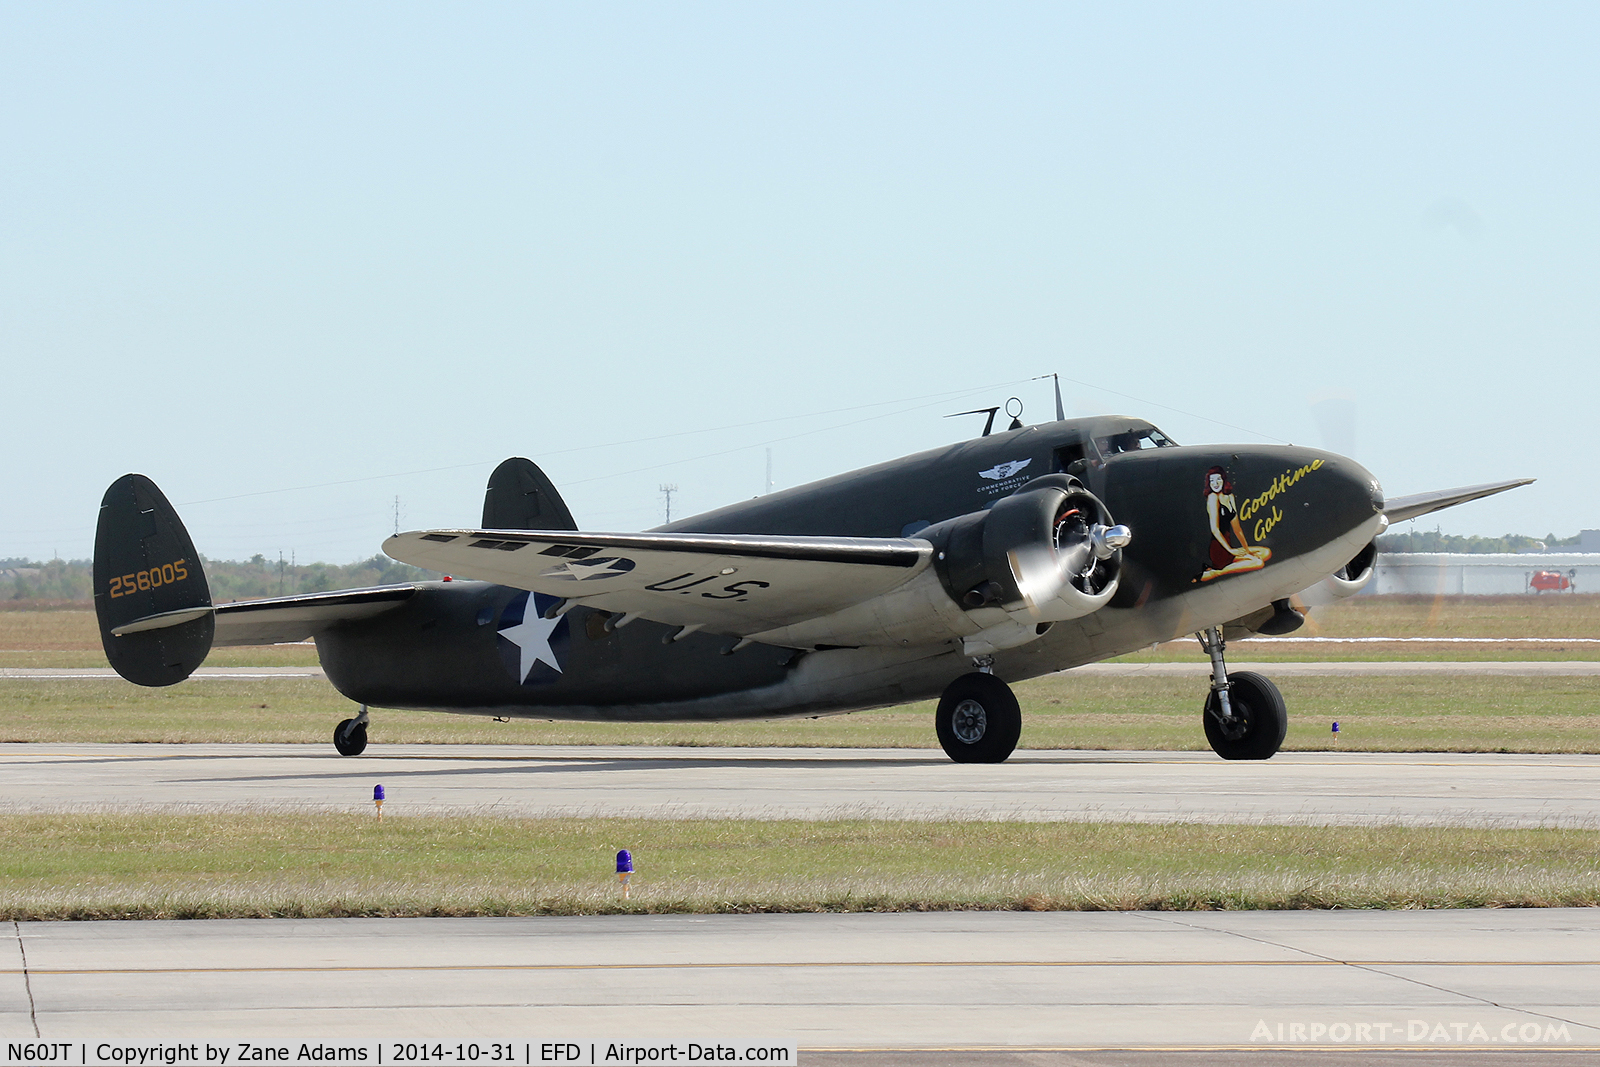 N60JT, 1943 Lockheed C-60A Lodestar C/N 2478, At the 2014 Wings Over Houston Airshow